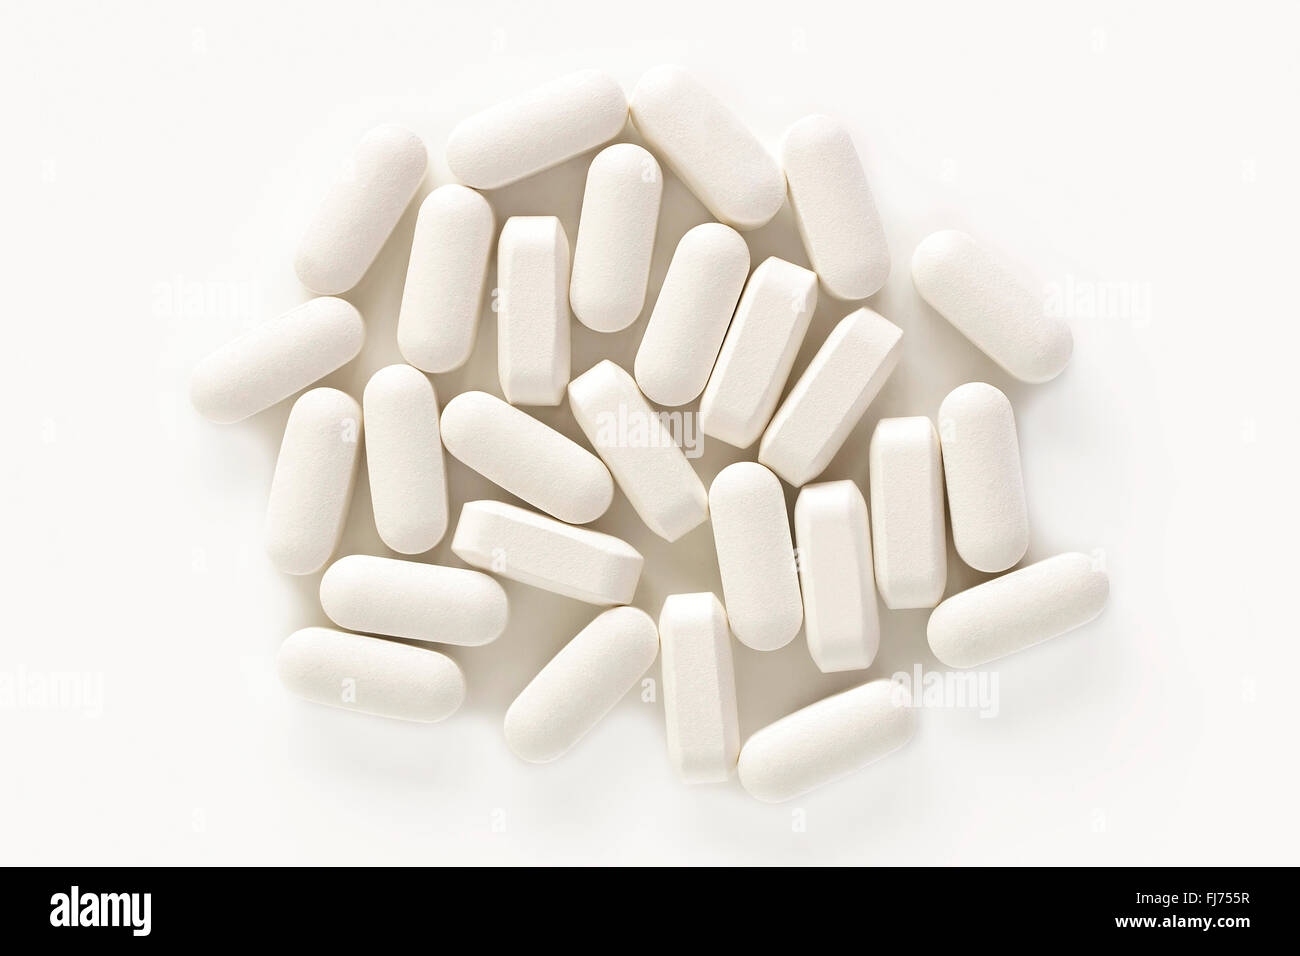 A pile of calcium vitamin supplement tablets isolated on a white background from above. Stock Photo